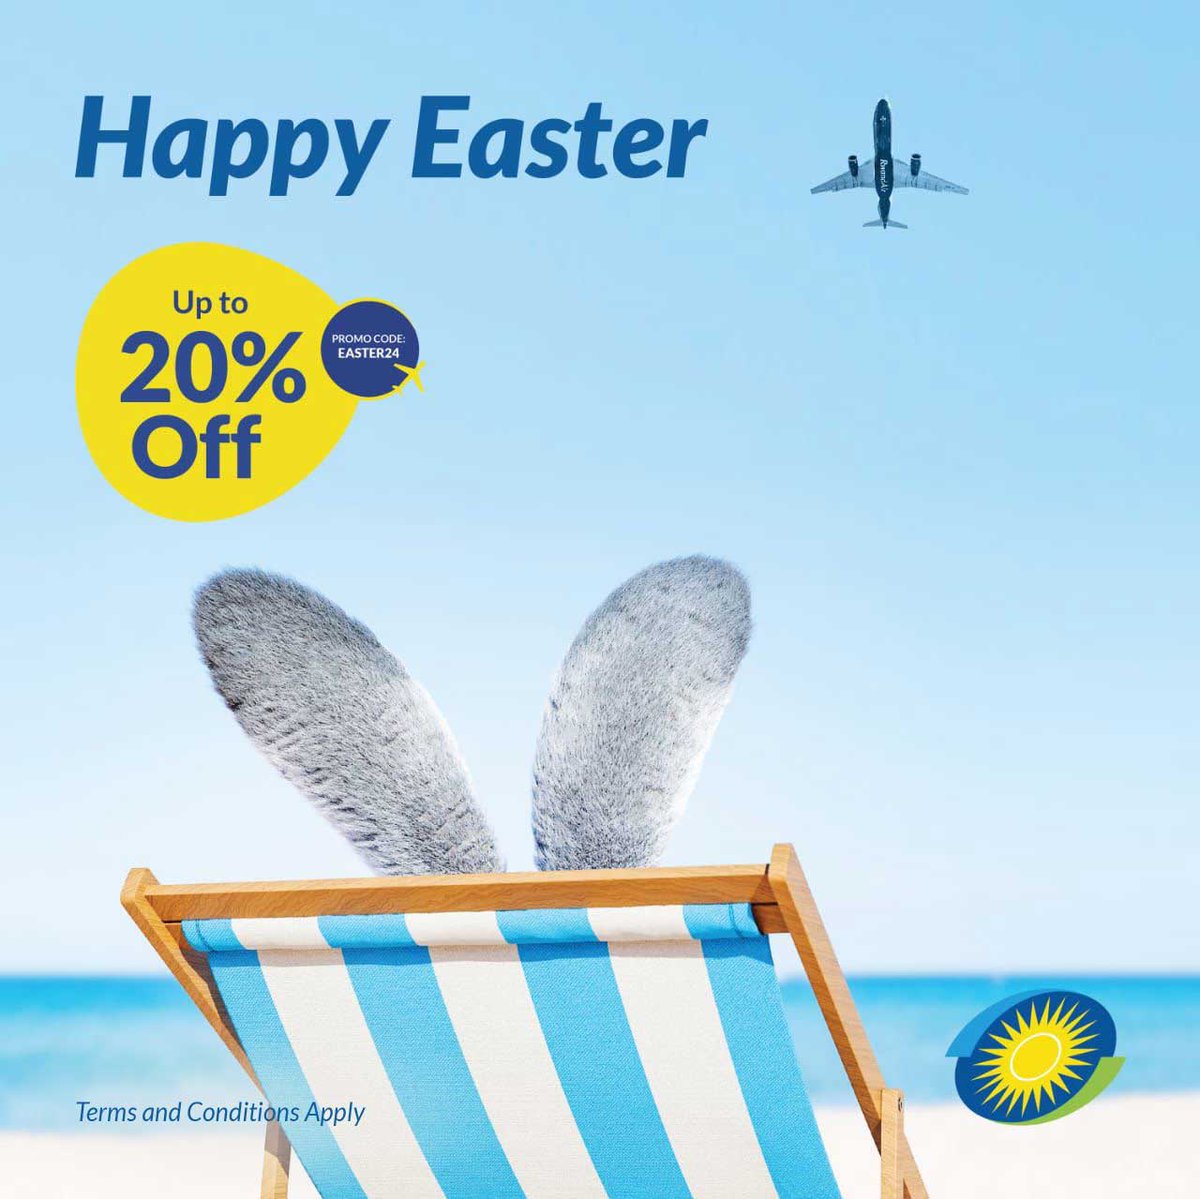 Get 20% off your flight from Kigali this #Easter, and explore new horizons, reconnect with loved ones, or chase those egg-cellent adventures: bit.ly/WbEsT24 #FlyTheDreamOfAfrica #FlySafeWithUs